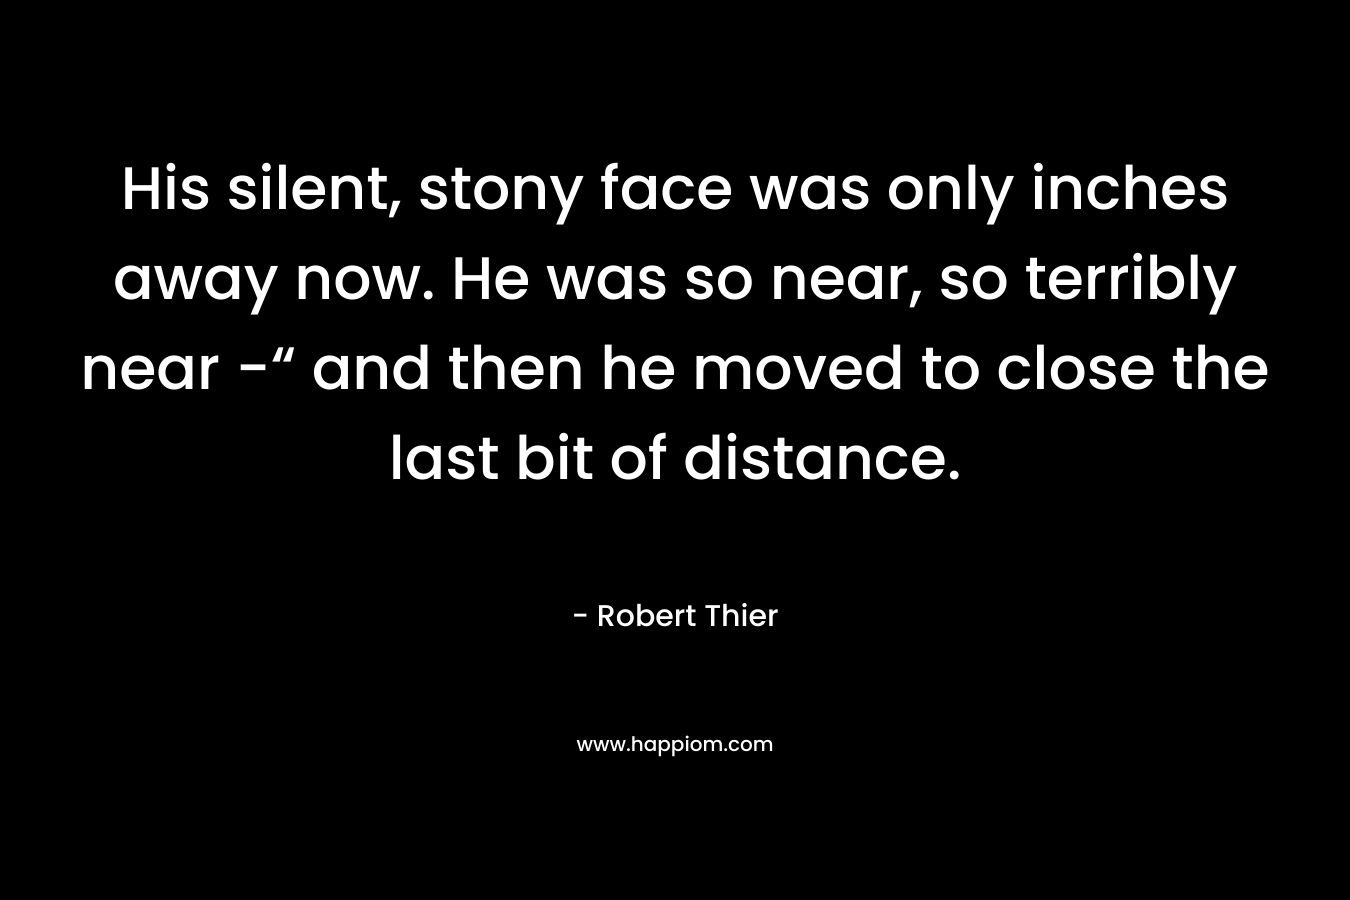 His silent, stony face was only inches away now. He was so near, so terribly near -“ and then he moved to close the last bit of distance. – Robert Thier